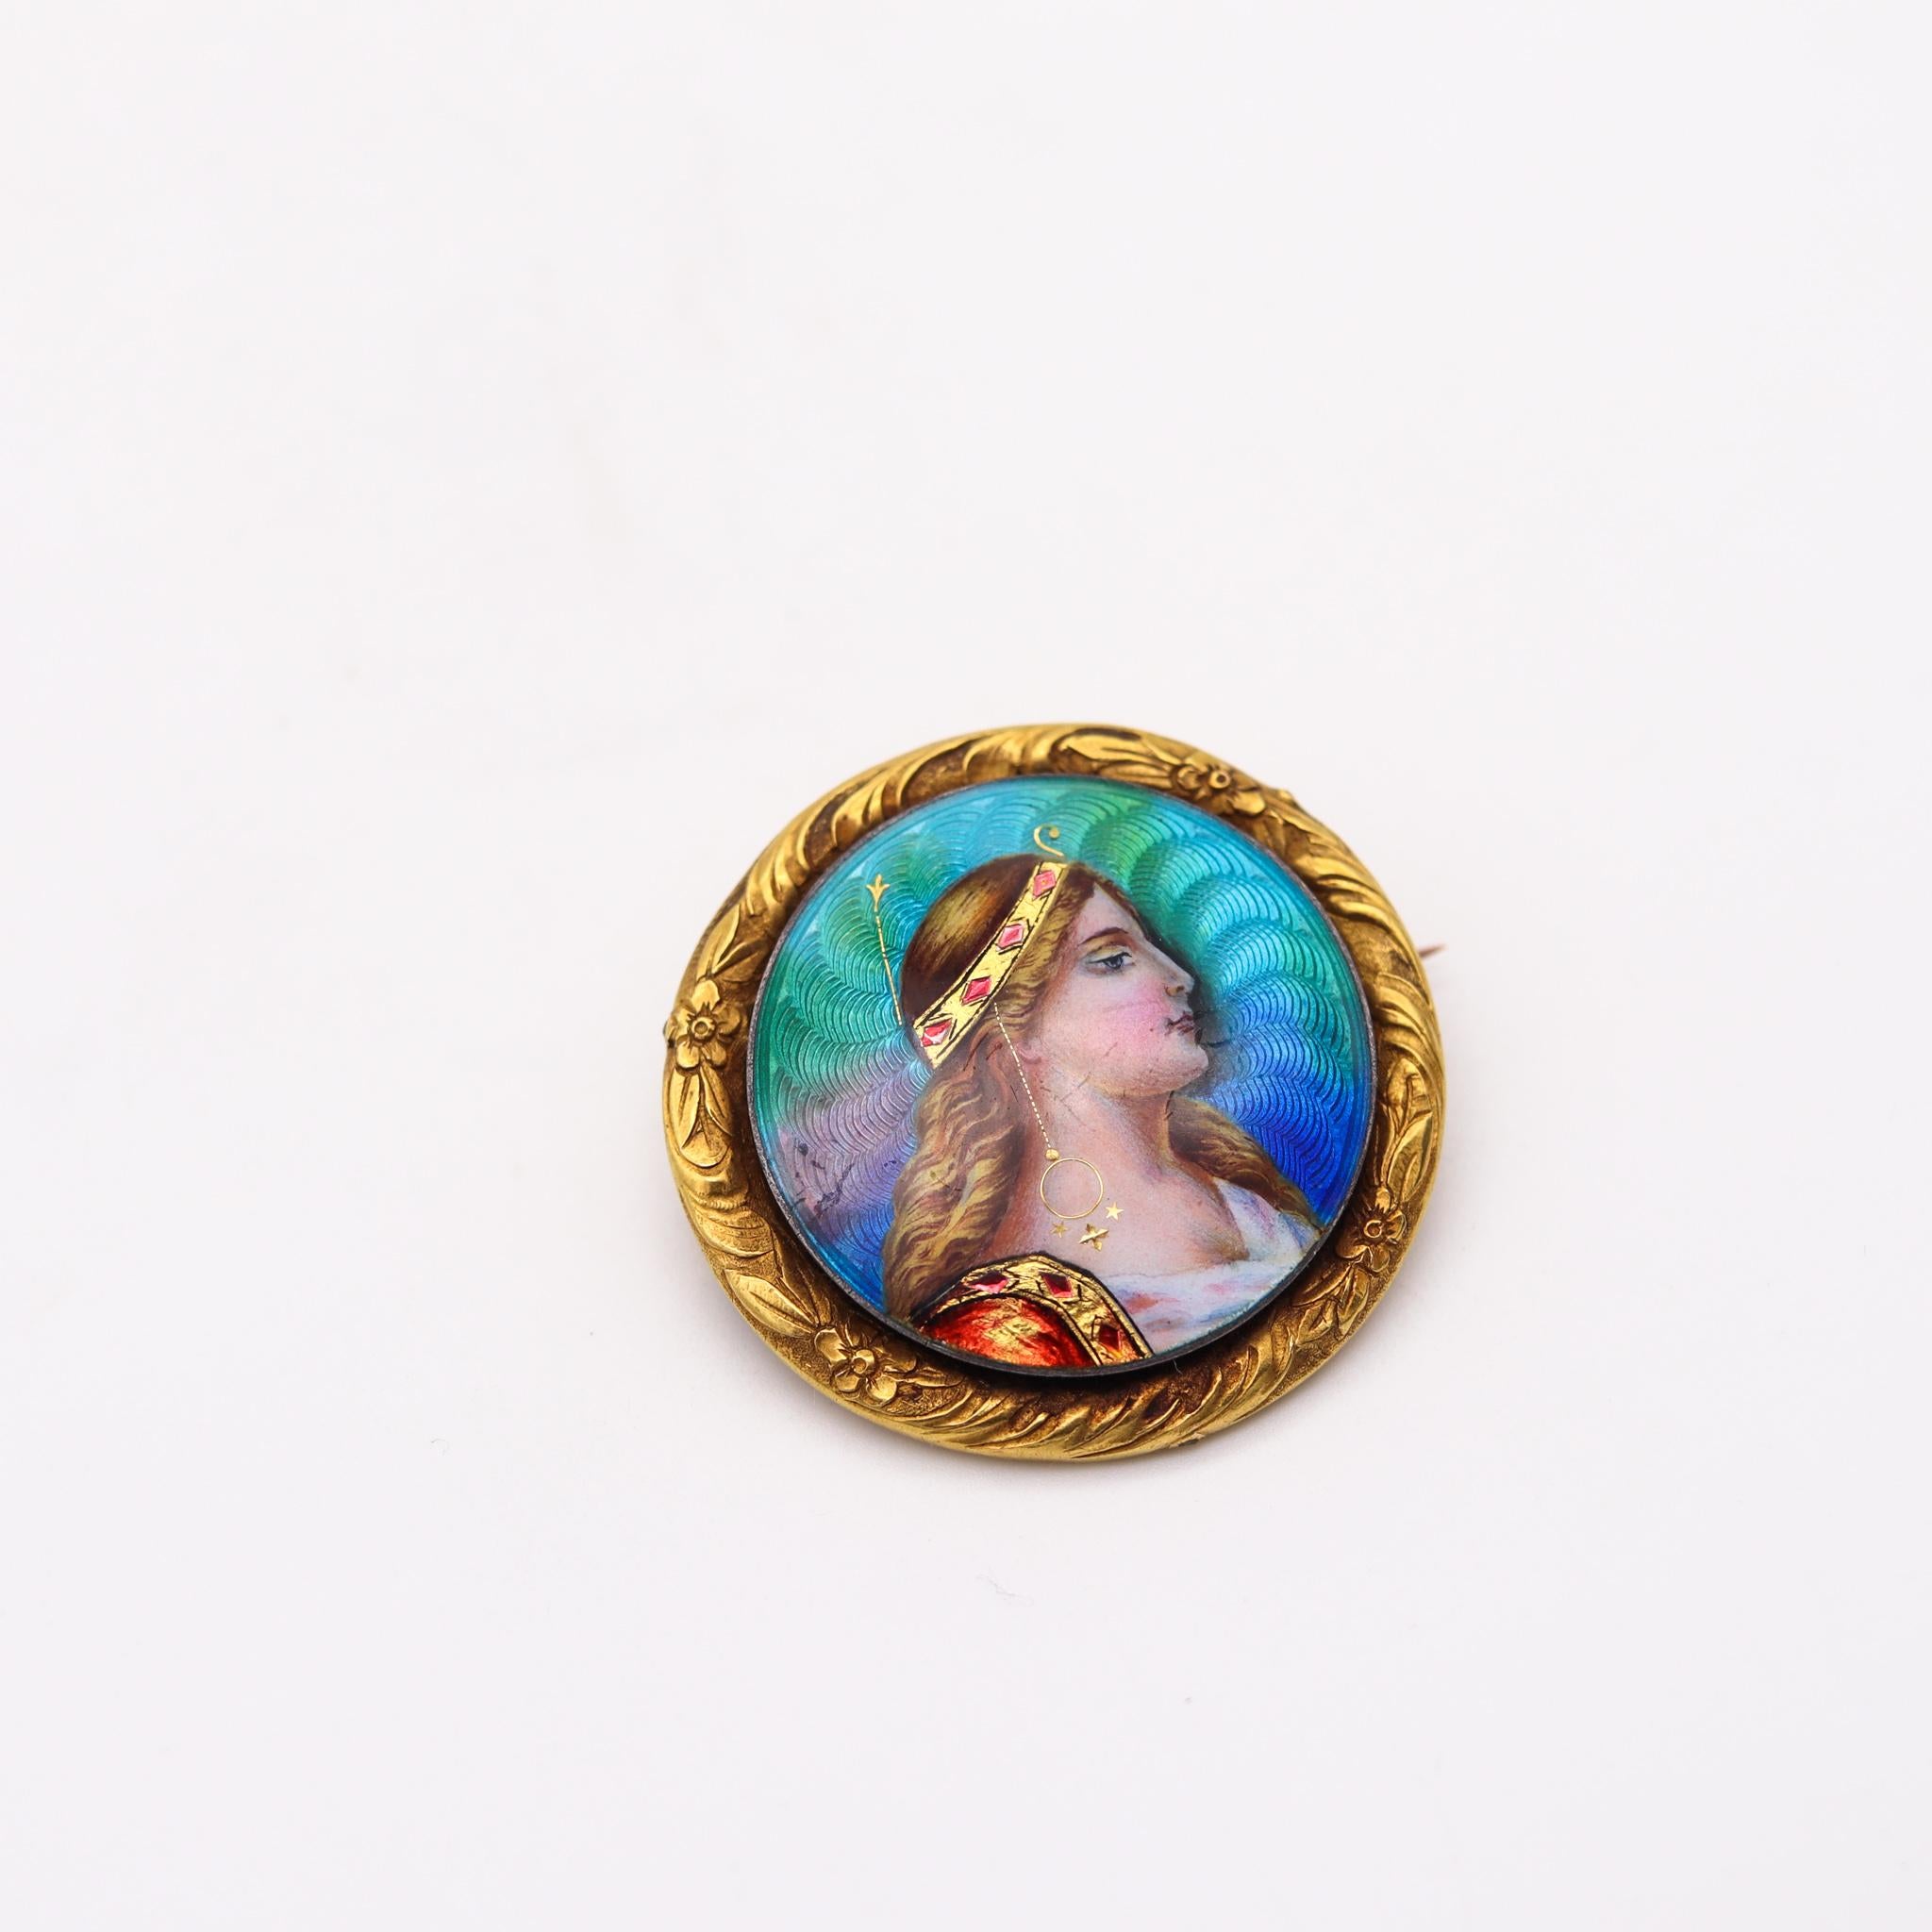 Meyle & Mayer 1895 German Art Nouveau Enameled Brooch with Diana in 18Kt Gold  For Sale 2